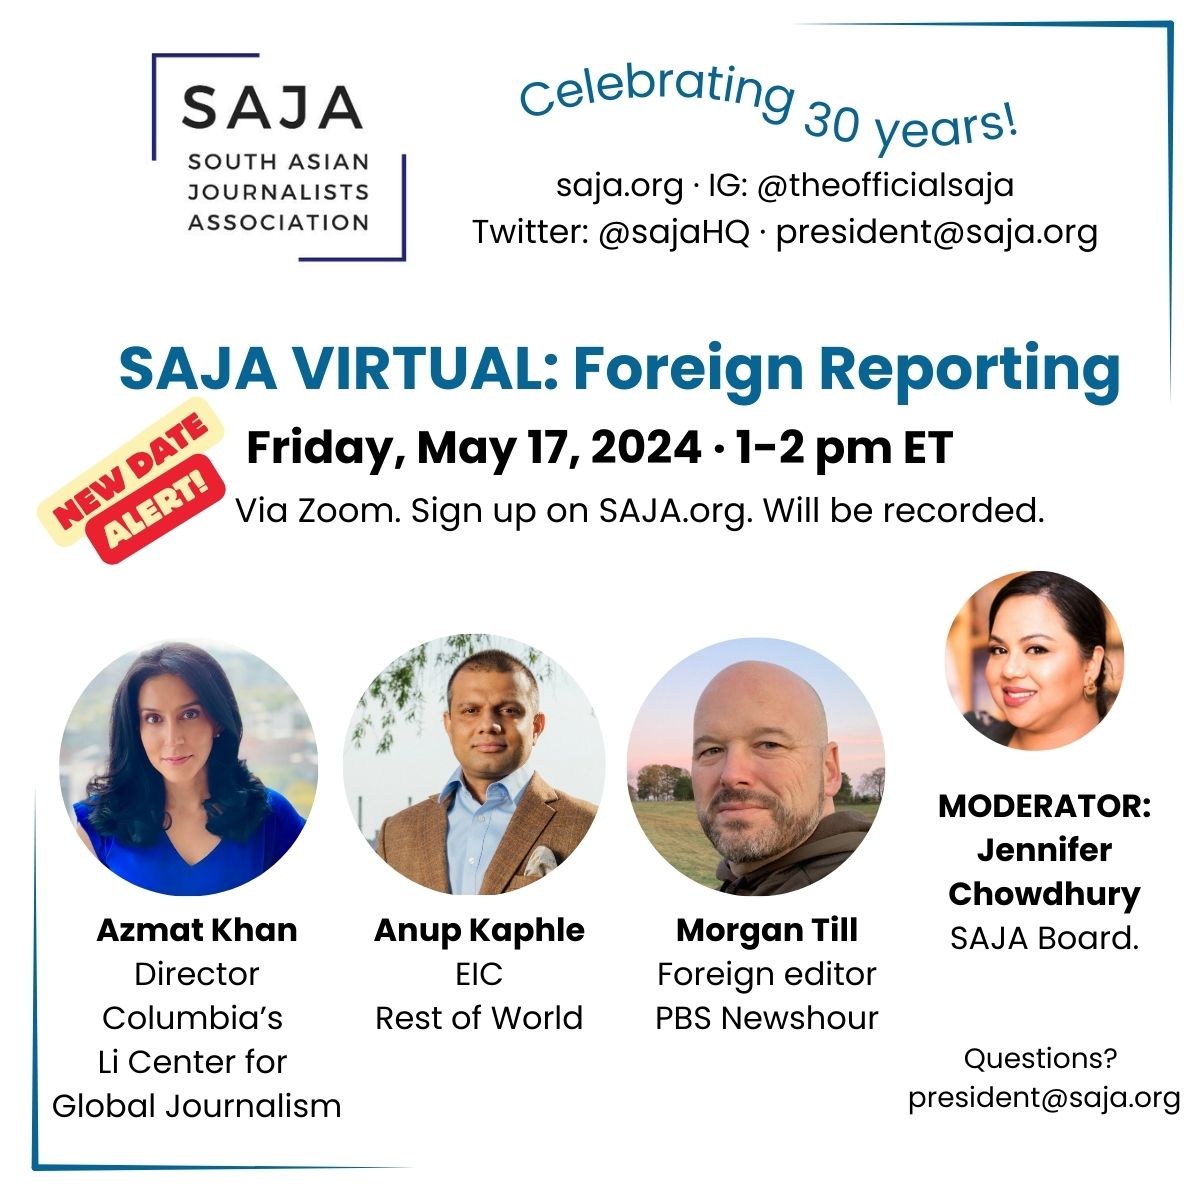 We are hosting a VIRTUAL all-star panel about foreign reporting w/ @AzmatZahra @AnupKaphle @mtill50 Moderated by SAJA board member @Jenn_Chowdhury Friday, May 17, 2024 1-2 pm ET Via Zoom (will be recorded) Free and open to the public. Sign up here: bit.ly/saja_foreign